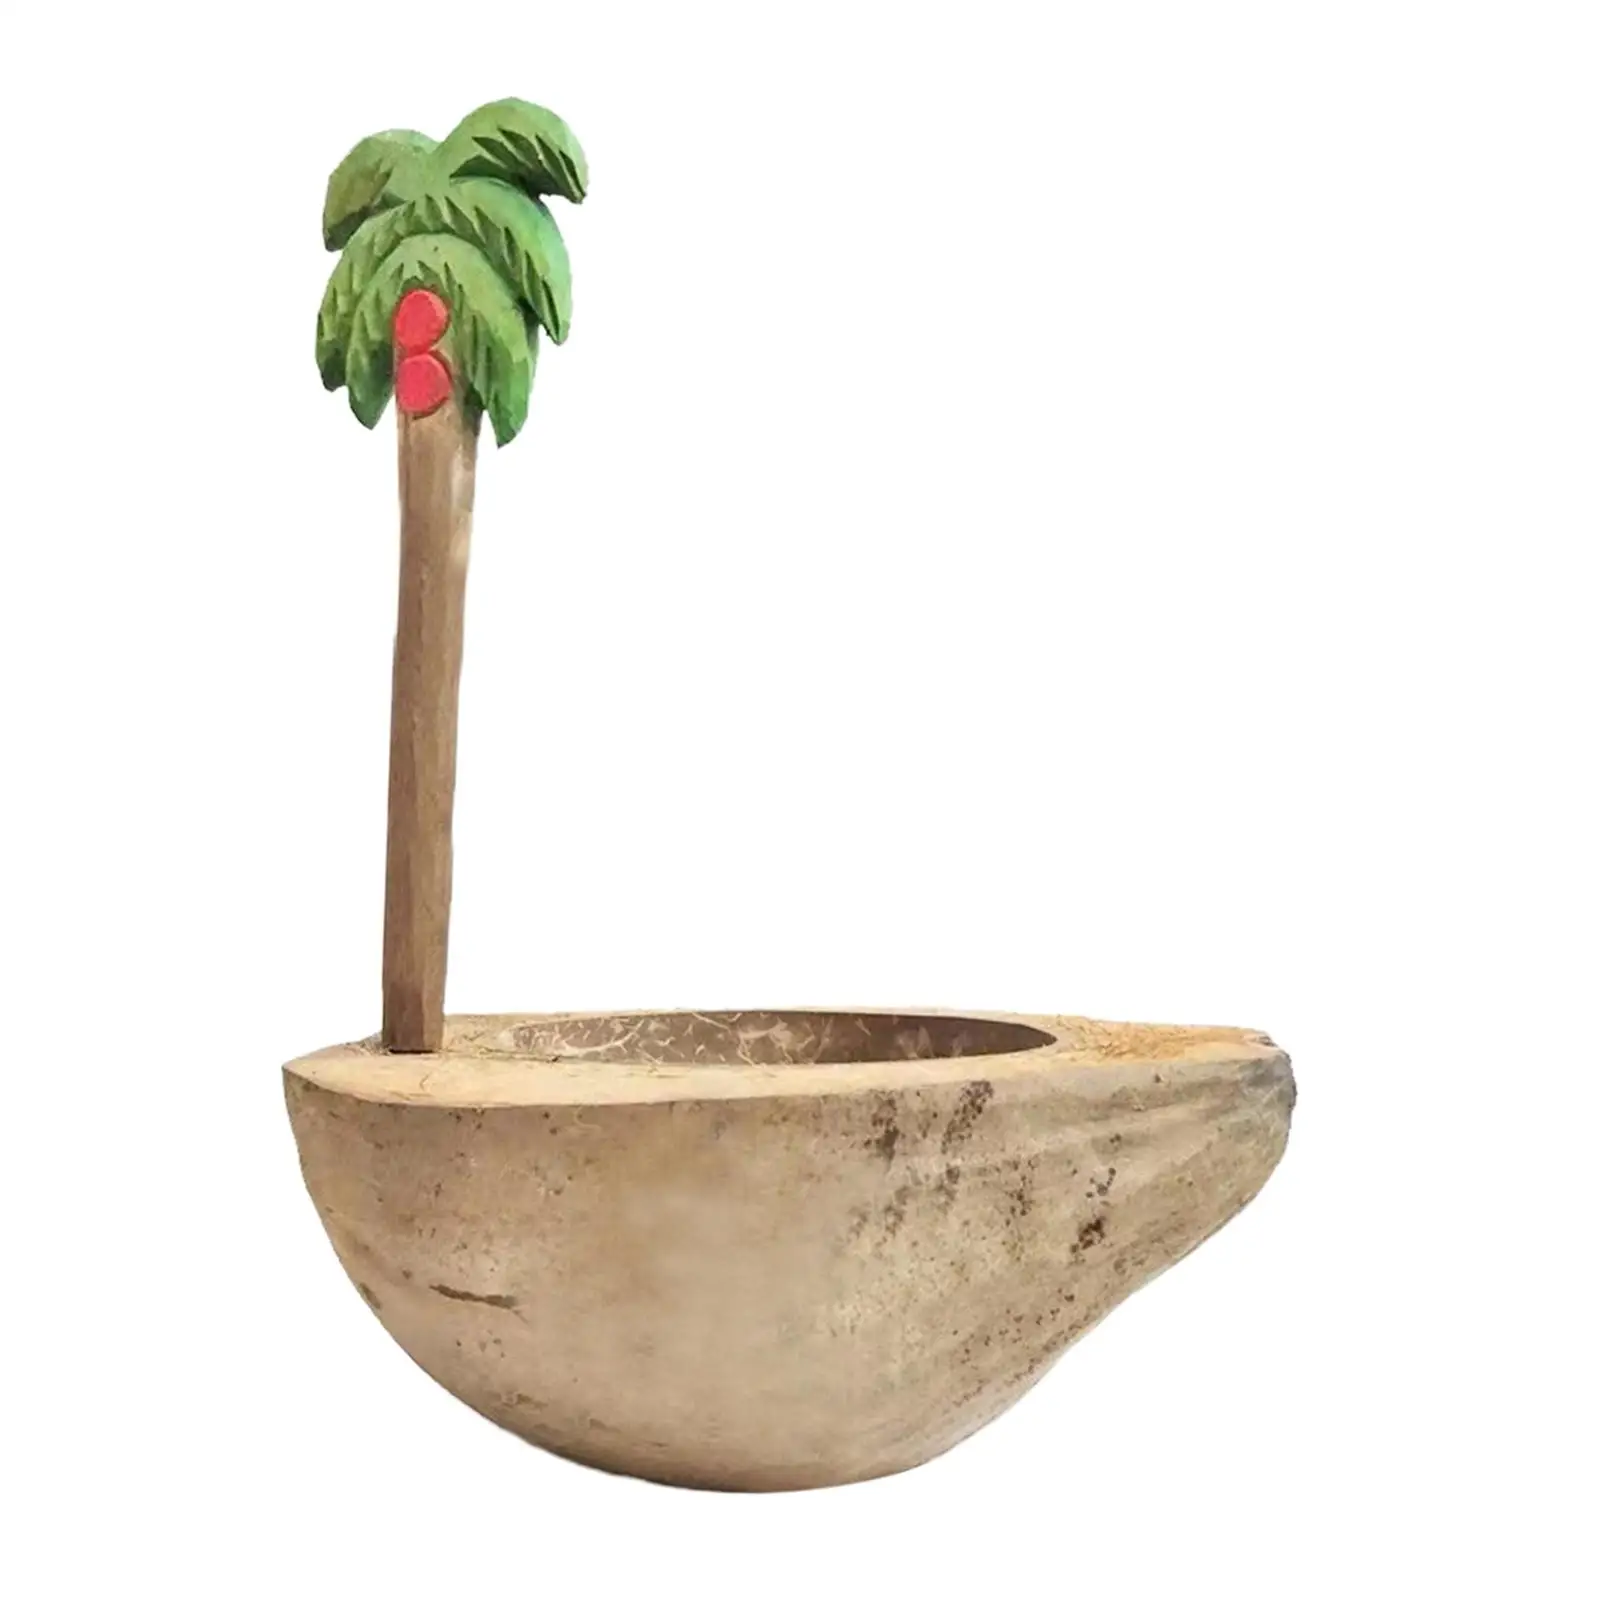 Coconut Tree Bowl Special Reusable Lightweight Creative Snack Party Dish Ice Cream Bowl for Home Table Decor Tourist Attractions